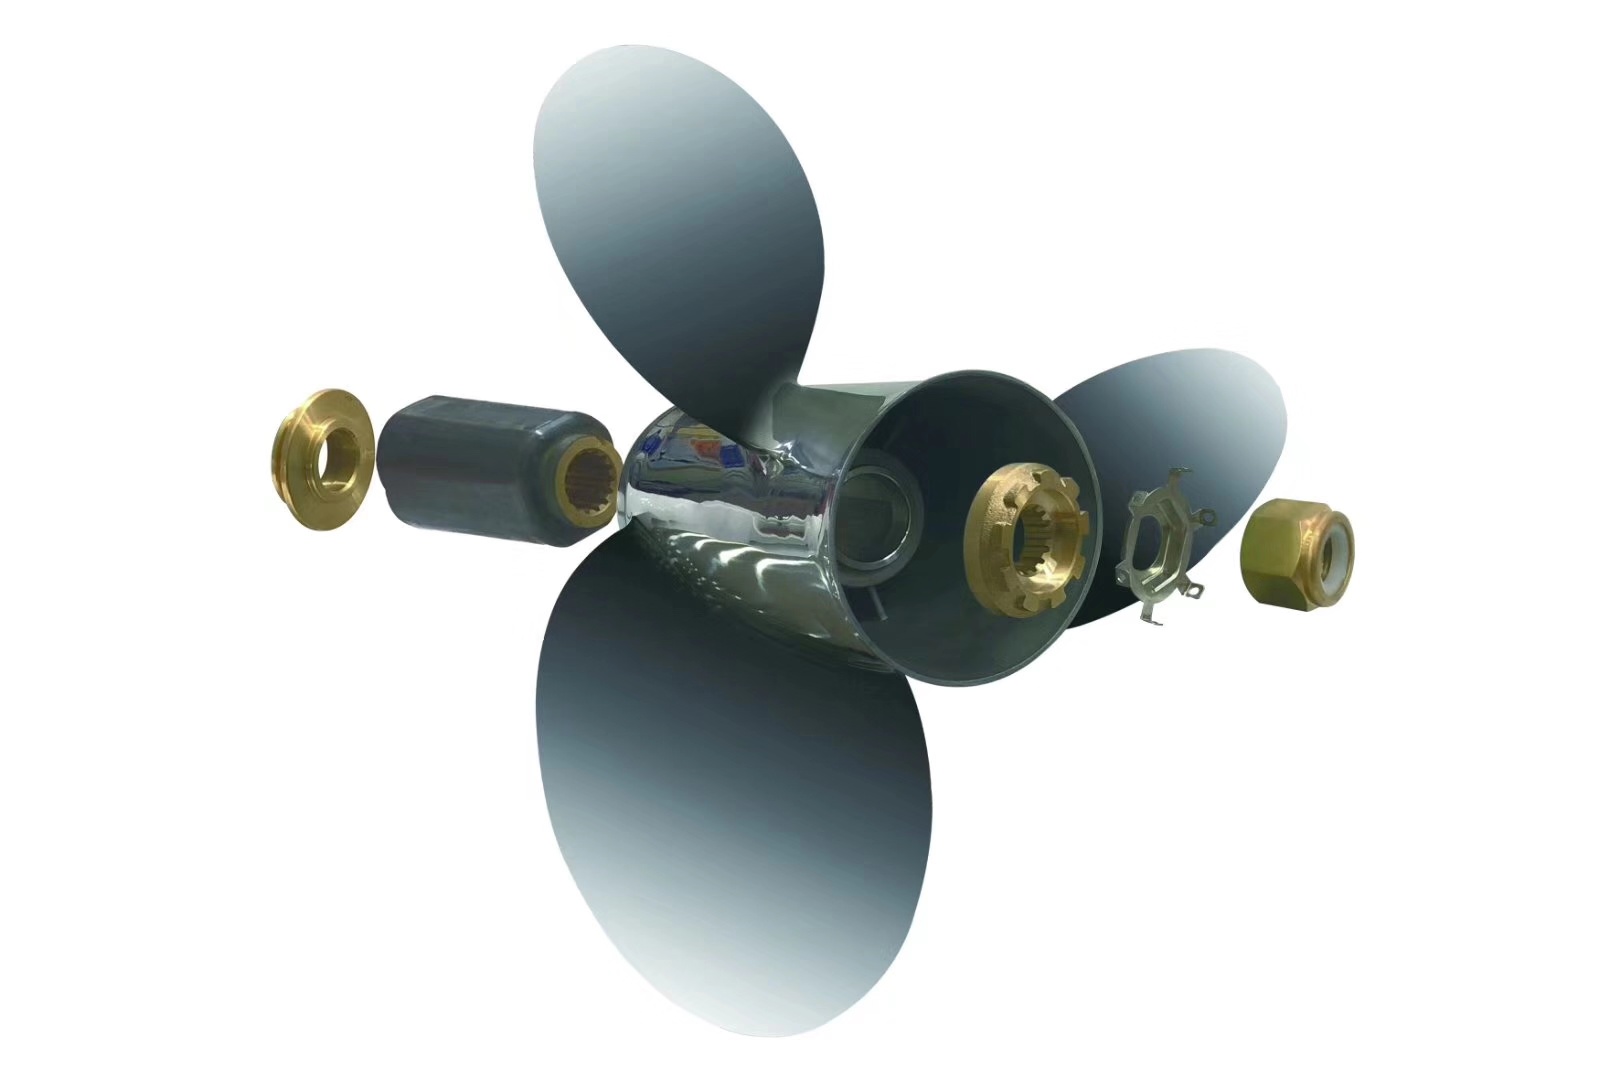 Introduction to the propeller